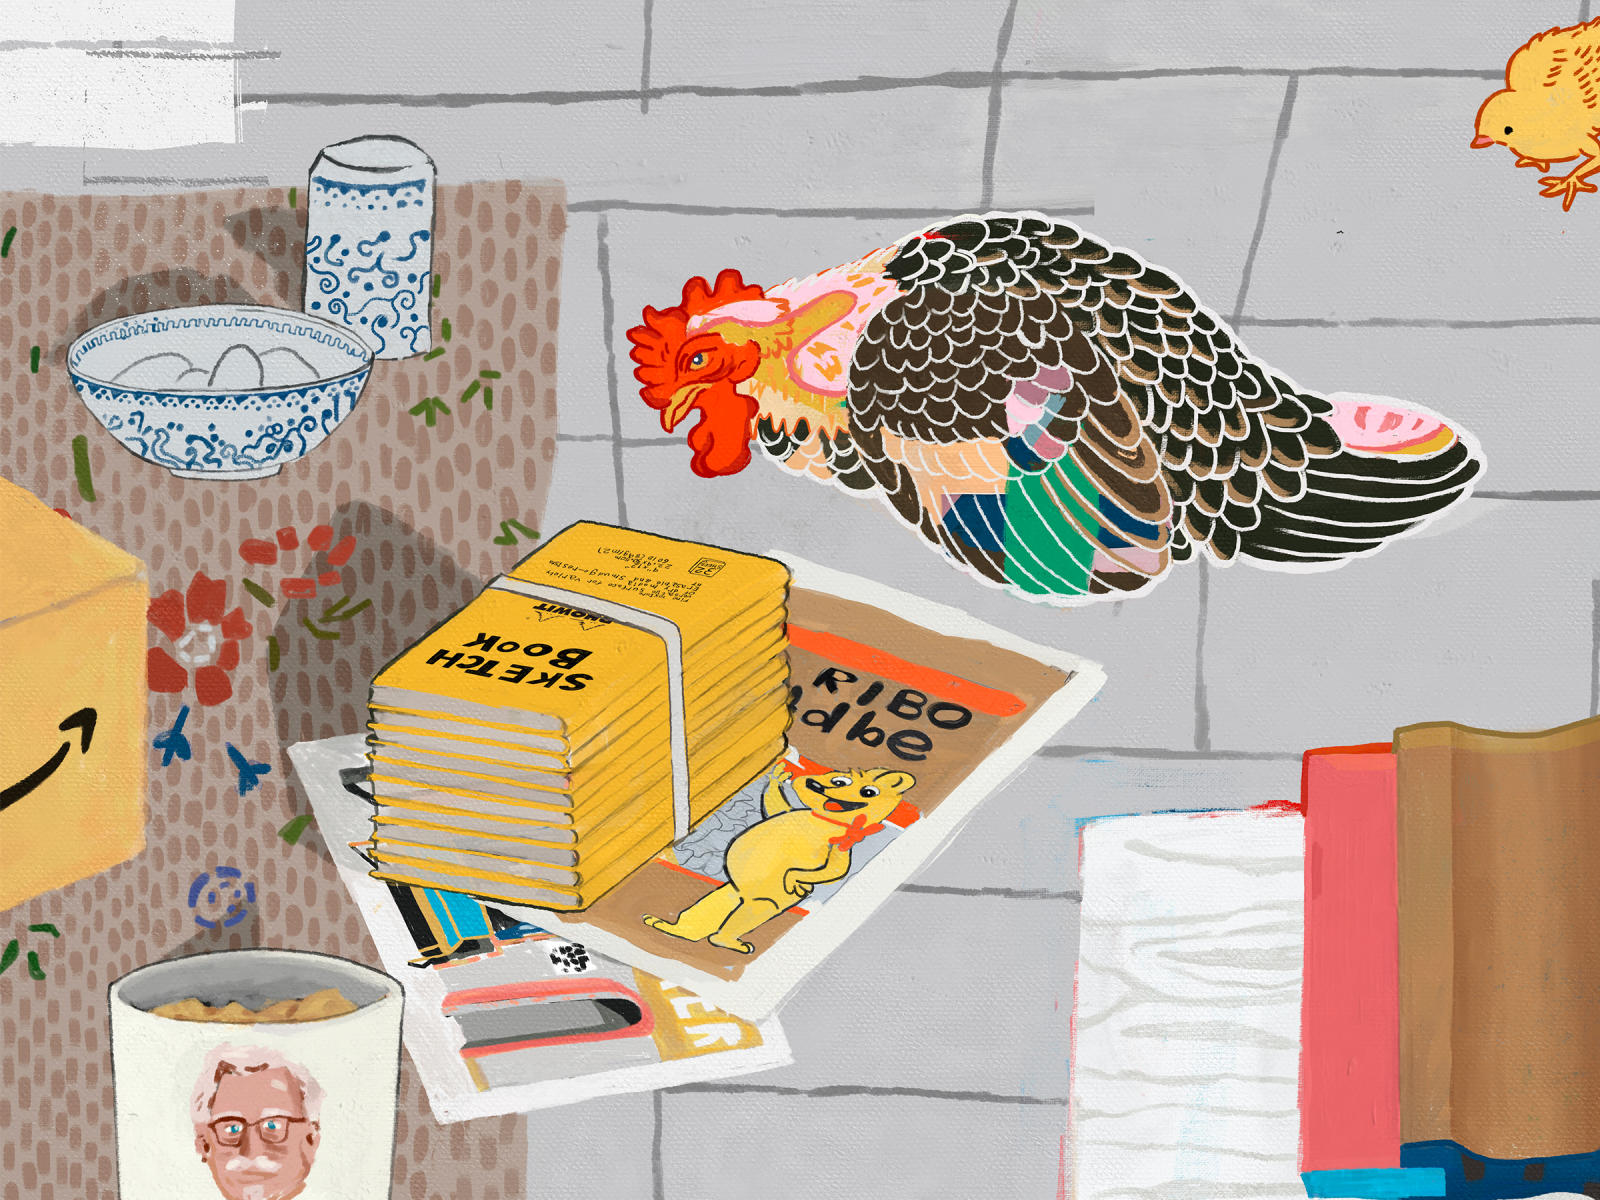 Detail of artwork depicting Howlt art goods and cloned chickens.